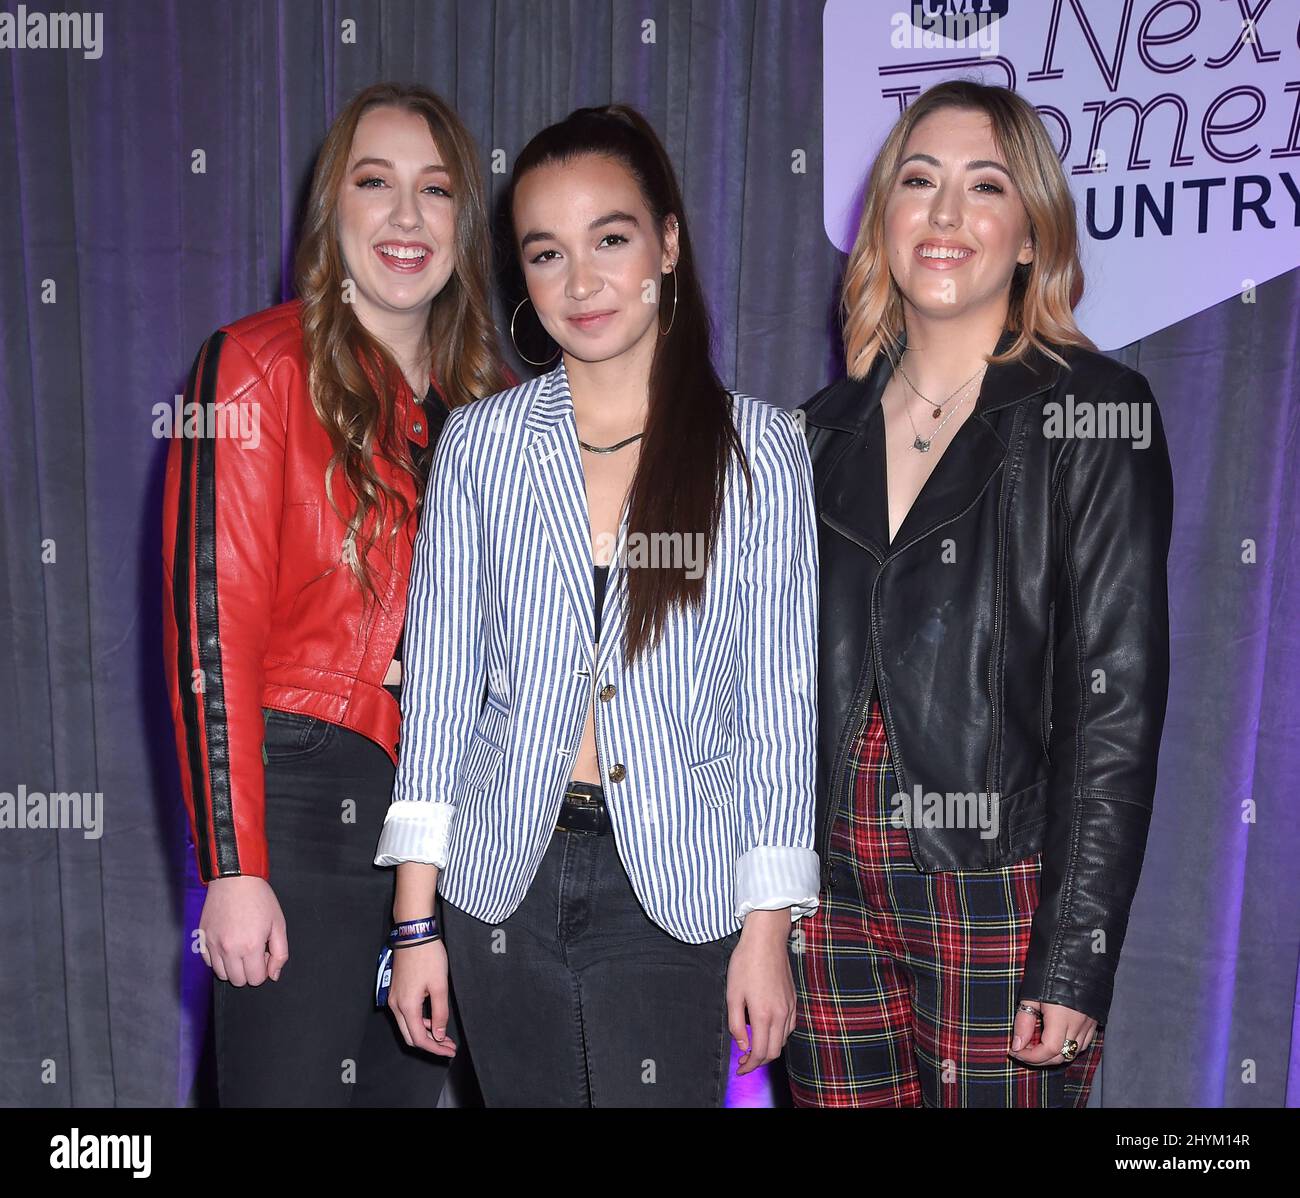 Sami Bearden, Savana Santos and Sam Backoff of Avenue Beat at the 2019 CMT Next Women of Country Celebration held at the CMA Theater at the Country Music Hall of Fame and Museum on November 12, 2019 in Nashville, TN. Stock Photo